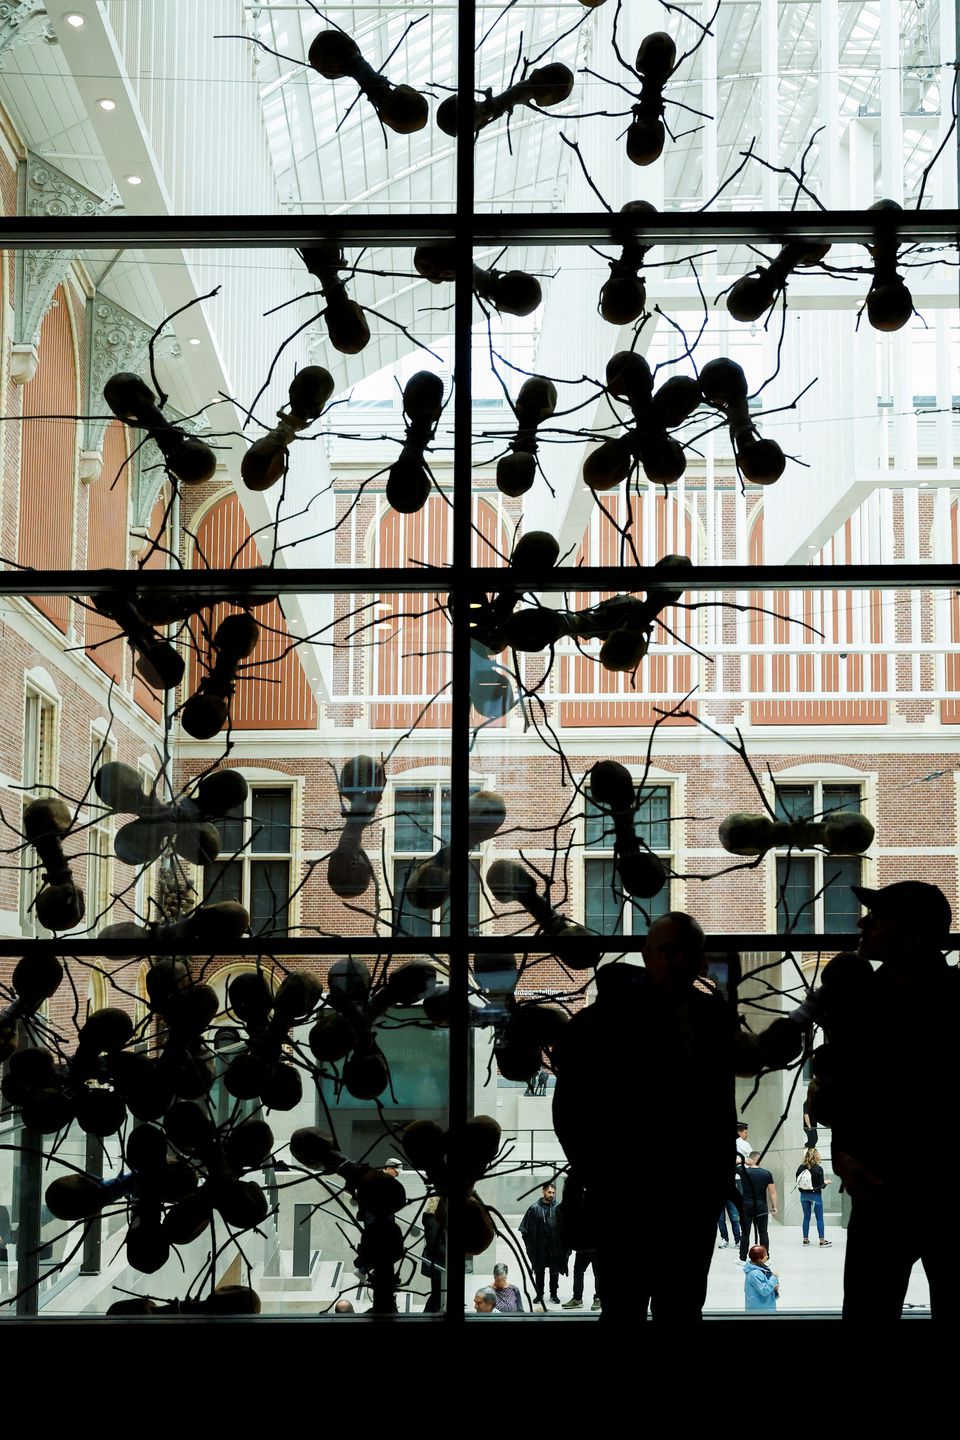 The exhibition Casa Tomada from artist Rafael Gomezbarros is displayed at Rijksmuseum in Amsterdam, Netherlands September 16, 2022. Photo: Reuters